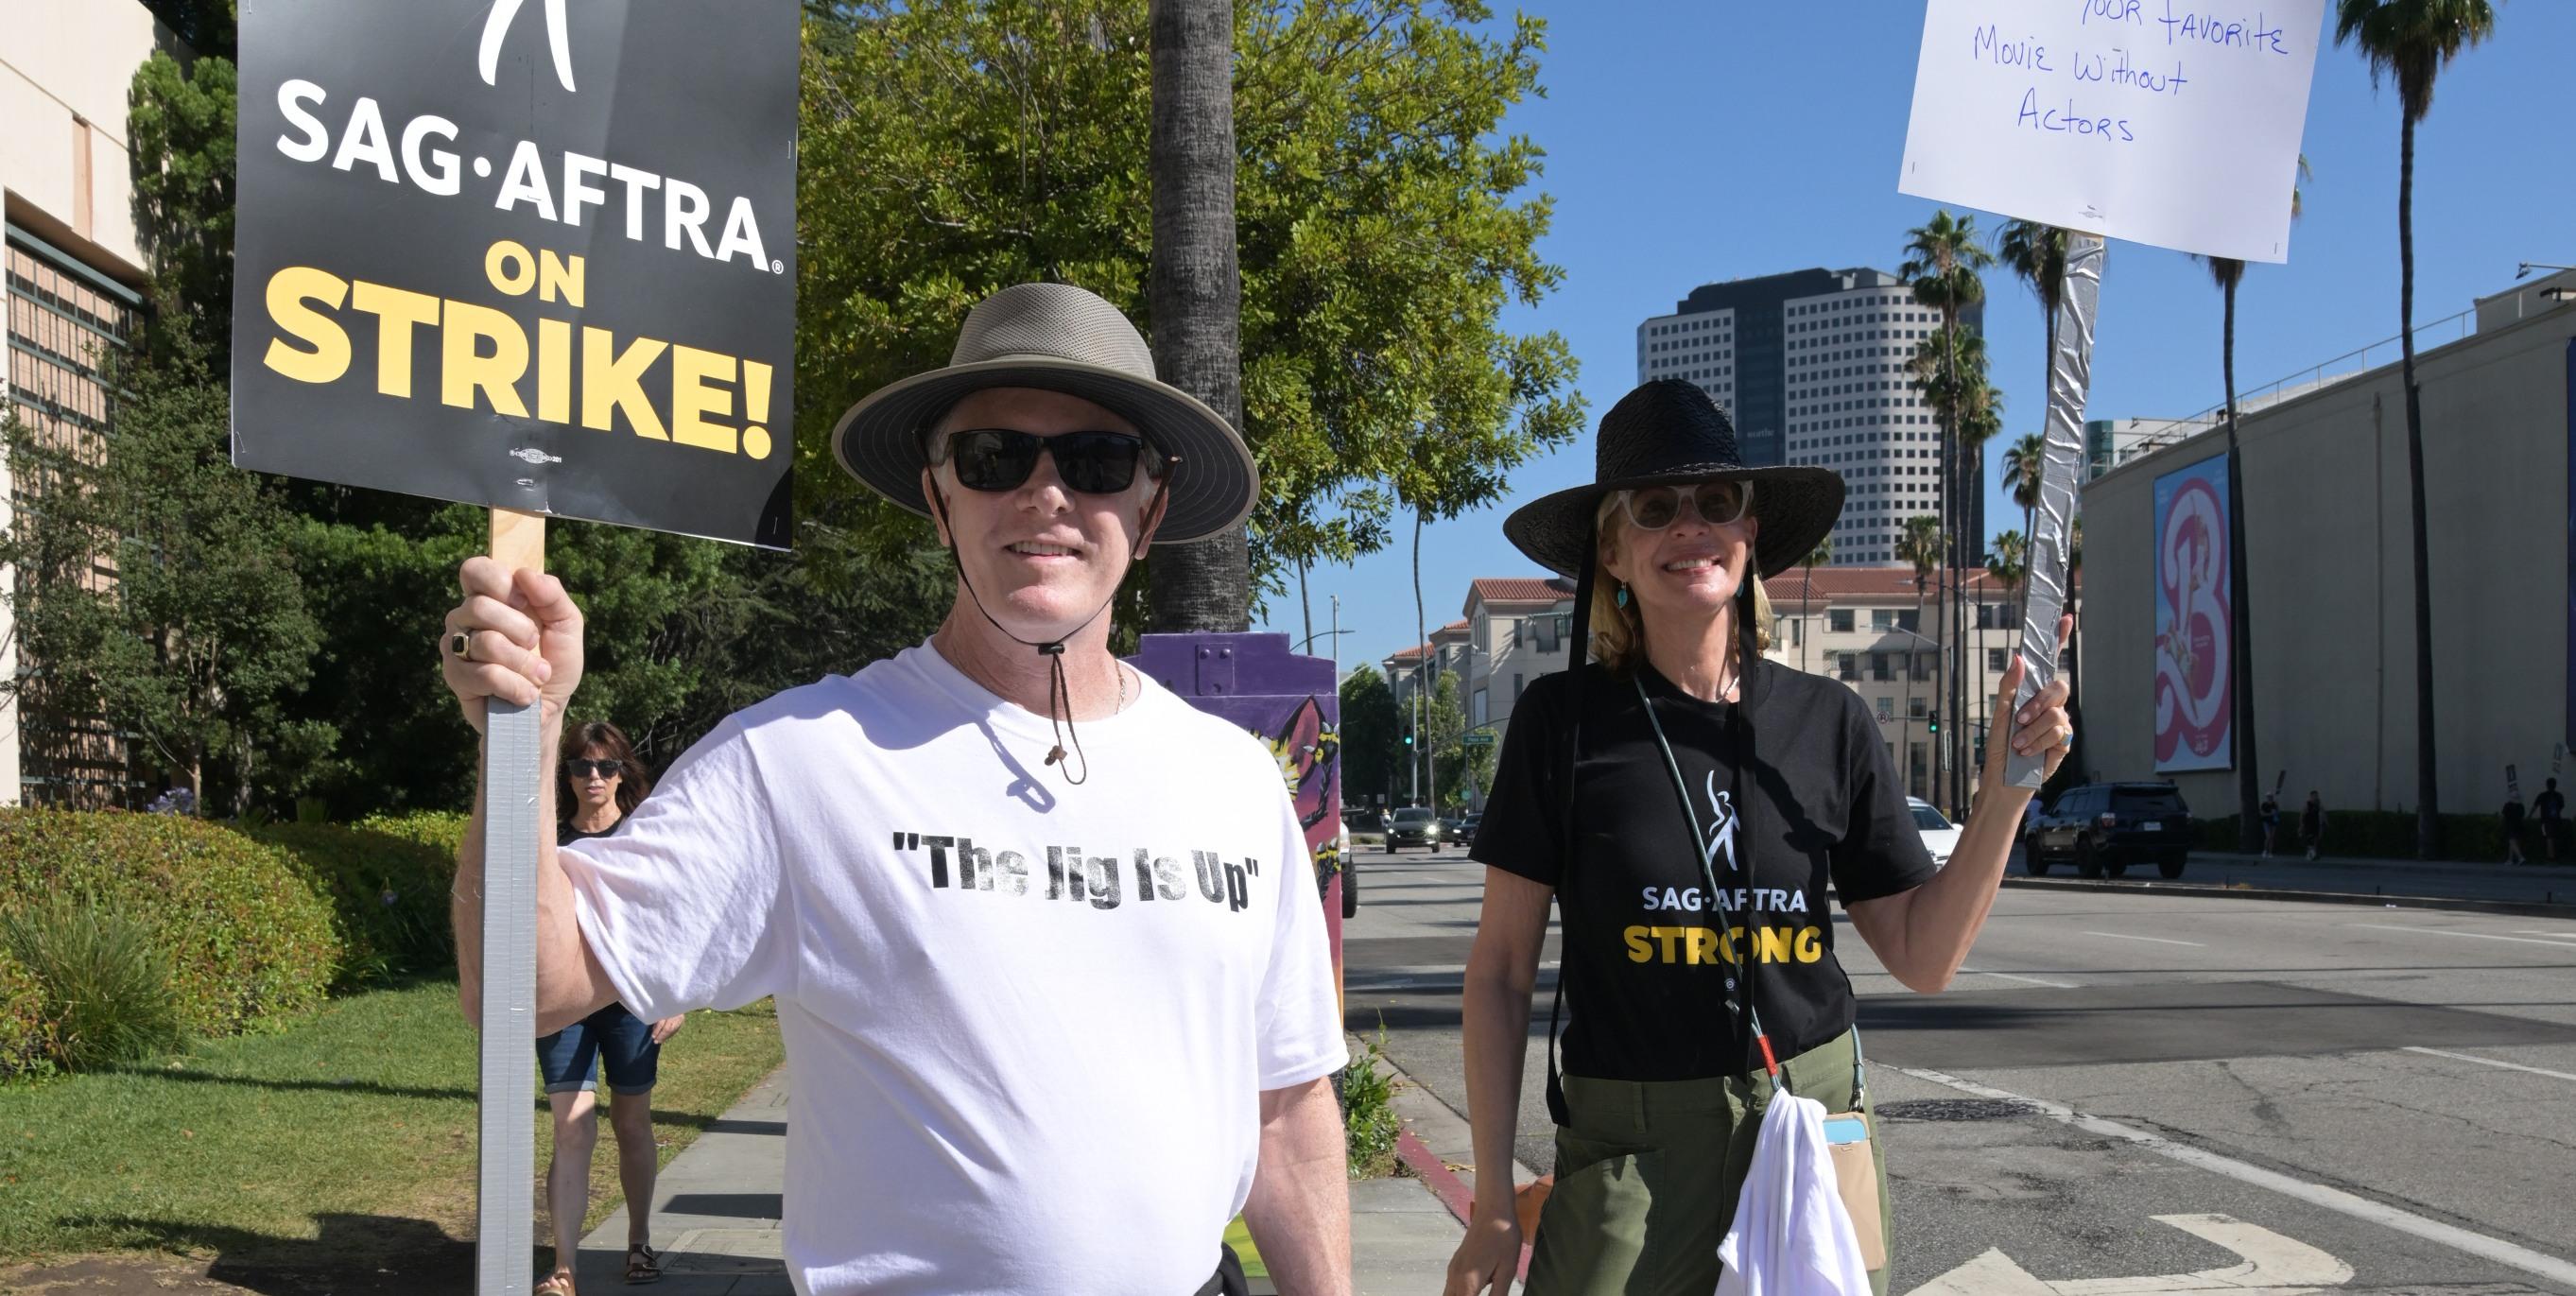 Steve Craik and Allison Janney join members and supporters of SAG-AFTRA on strike